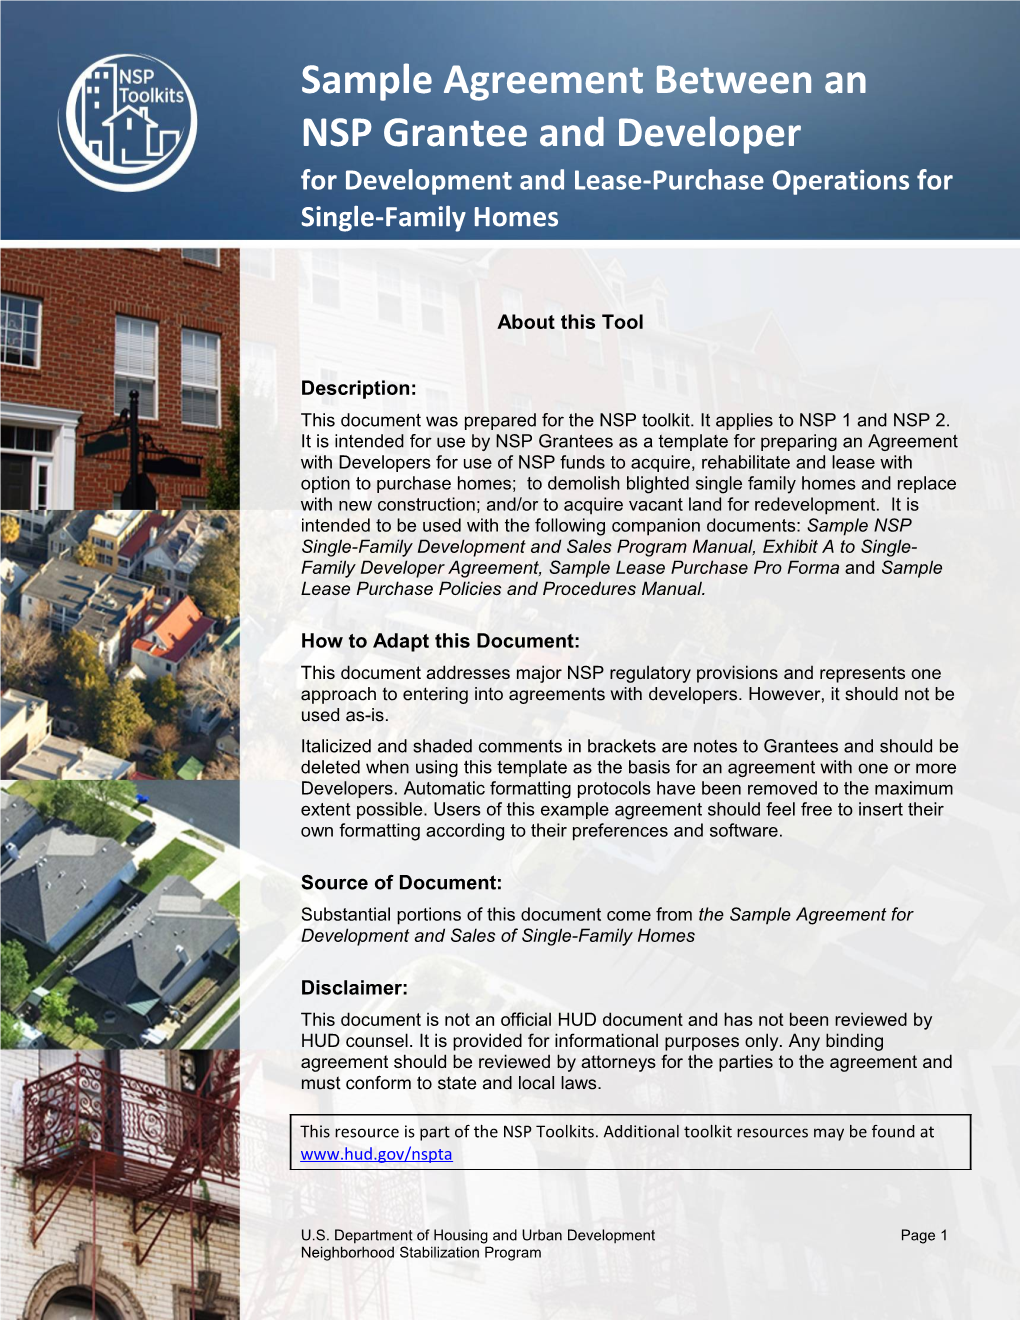 Sample Agreement Between NSP Grantee and Developer for Development and Lease-Purchase Operations